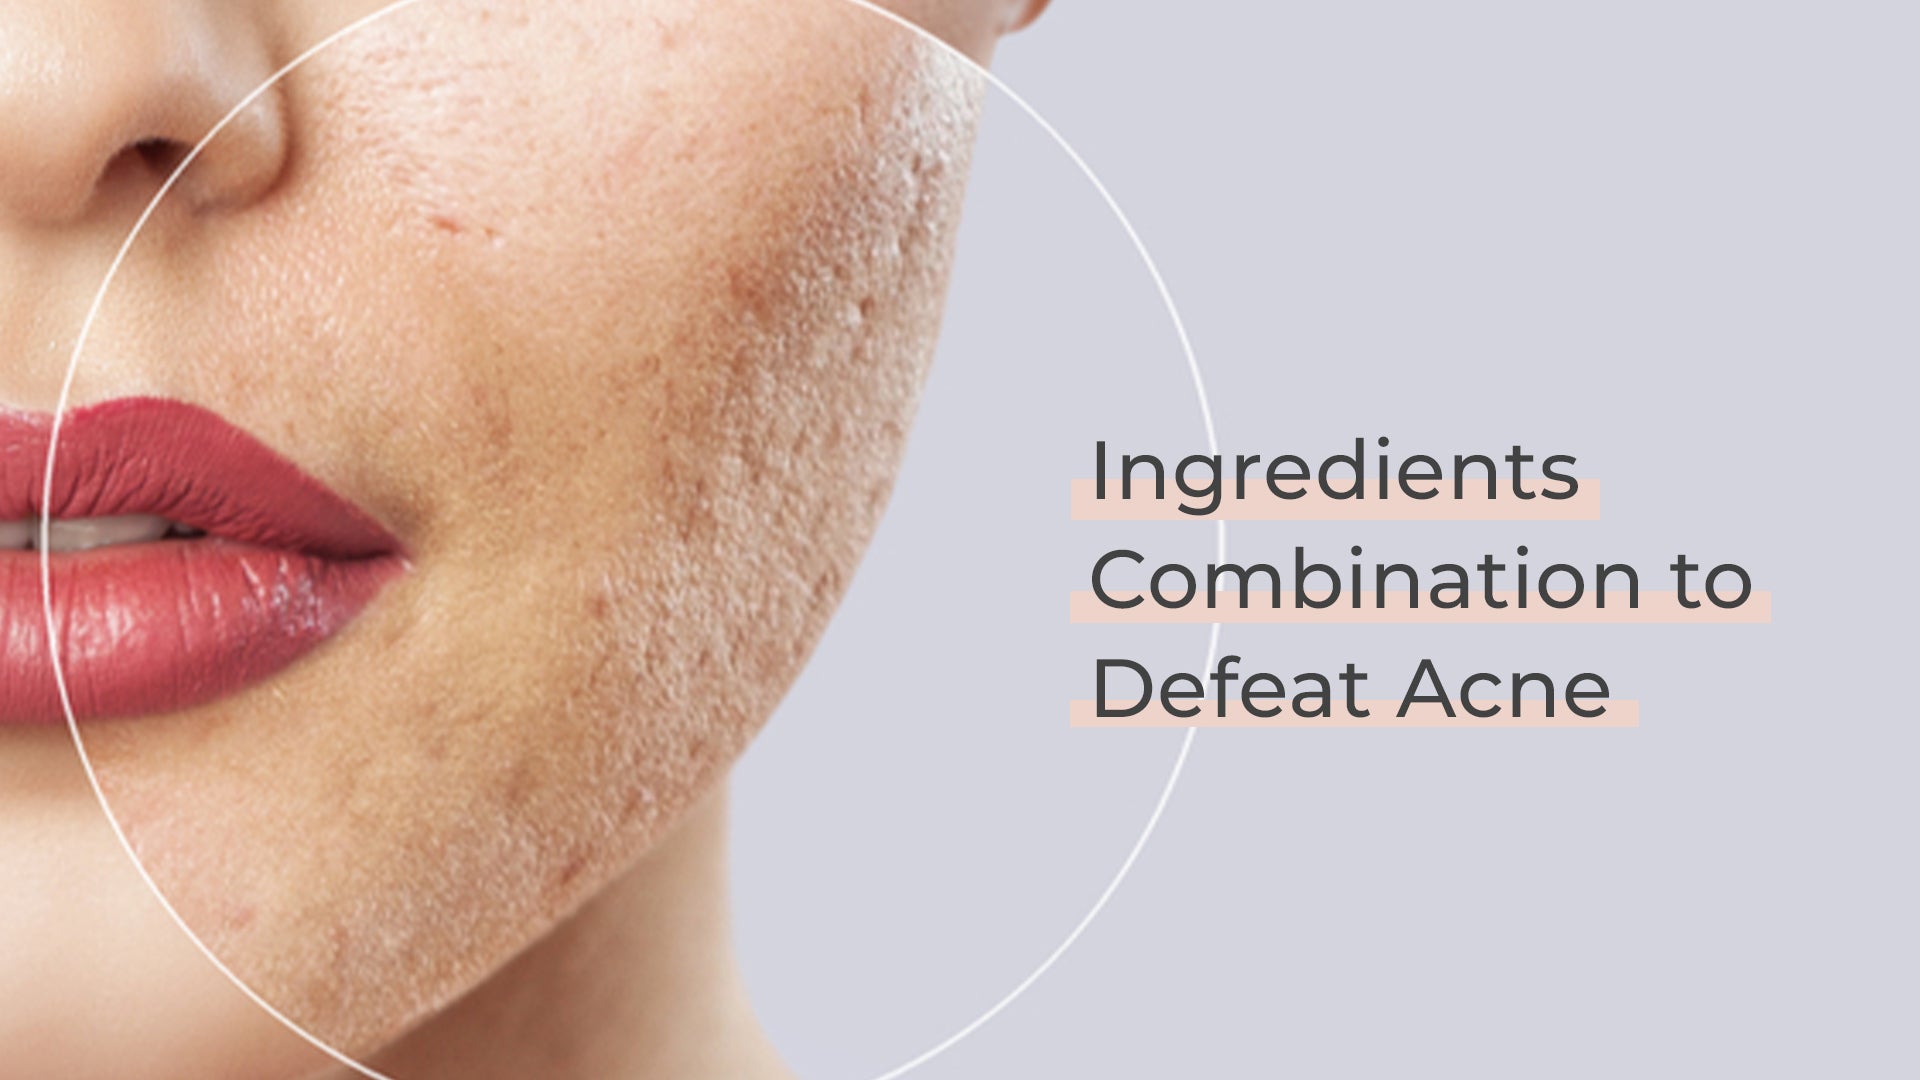 Five Ingredients Combination to Defeat Acne